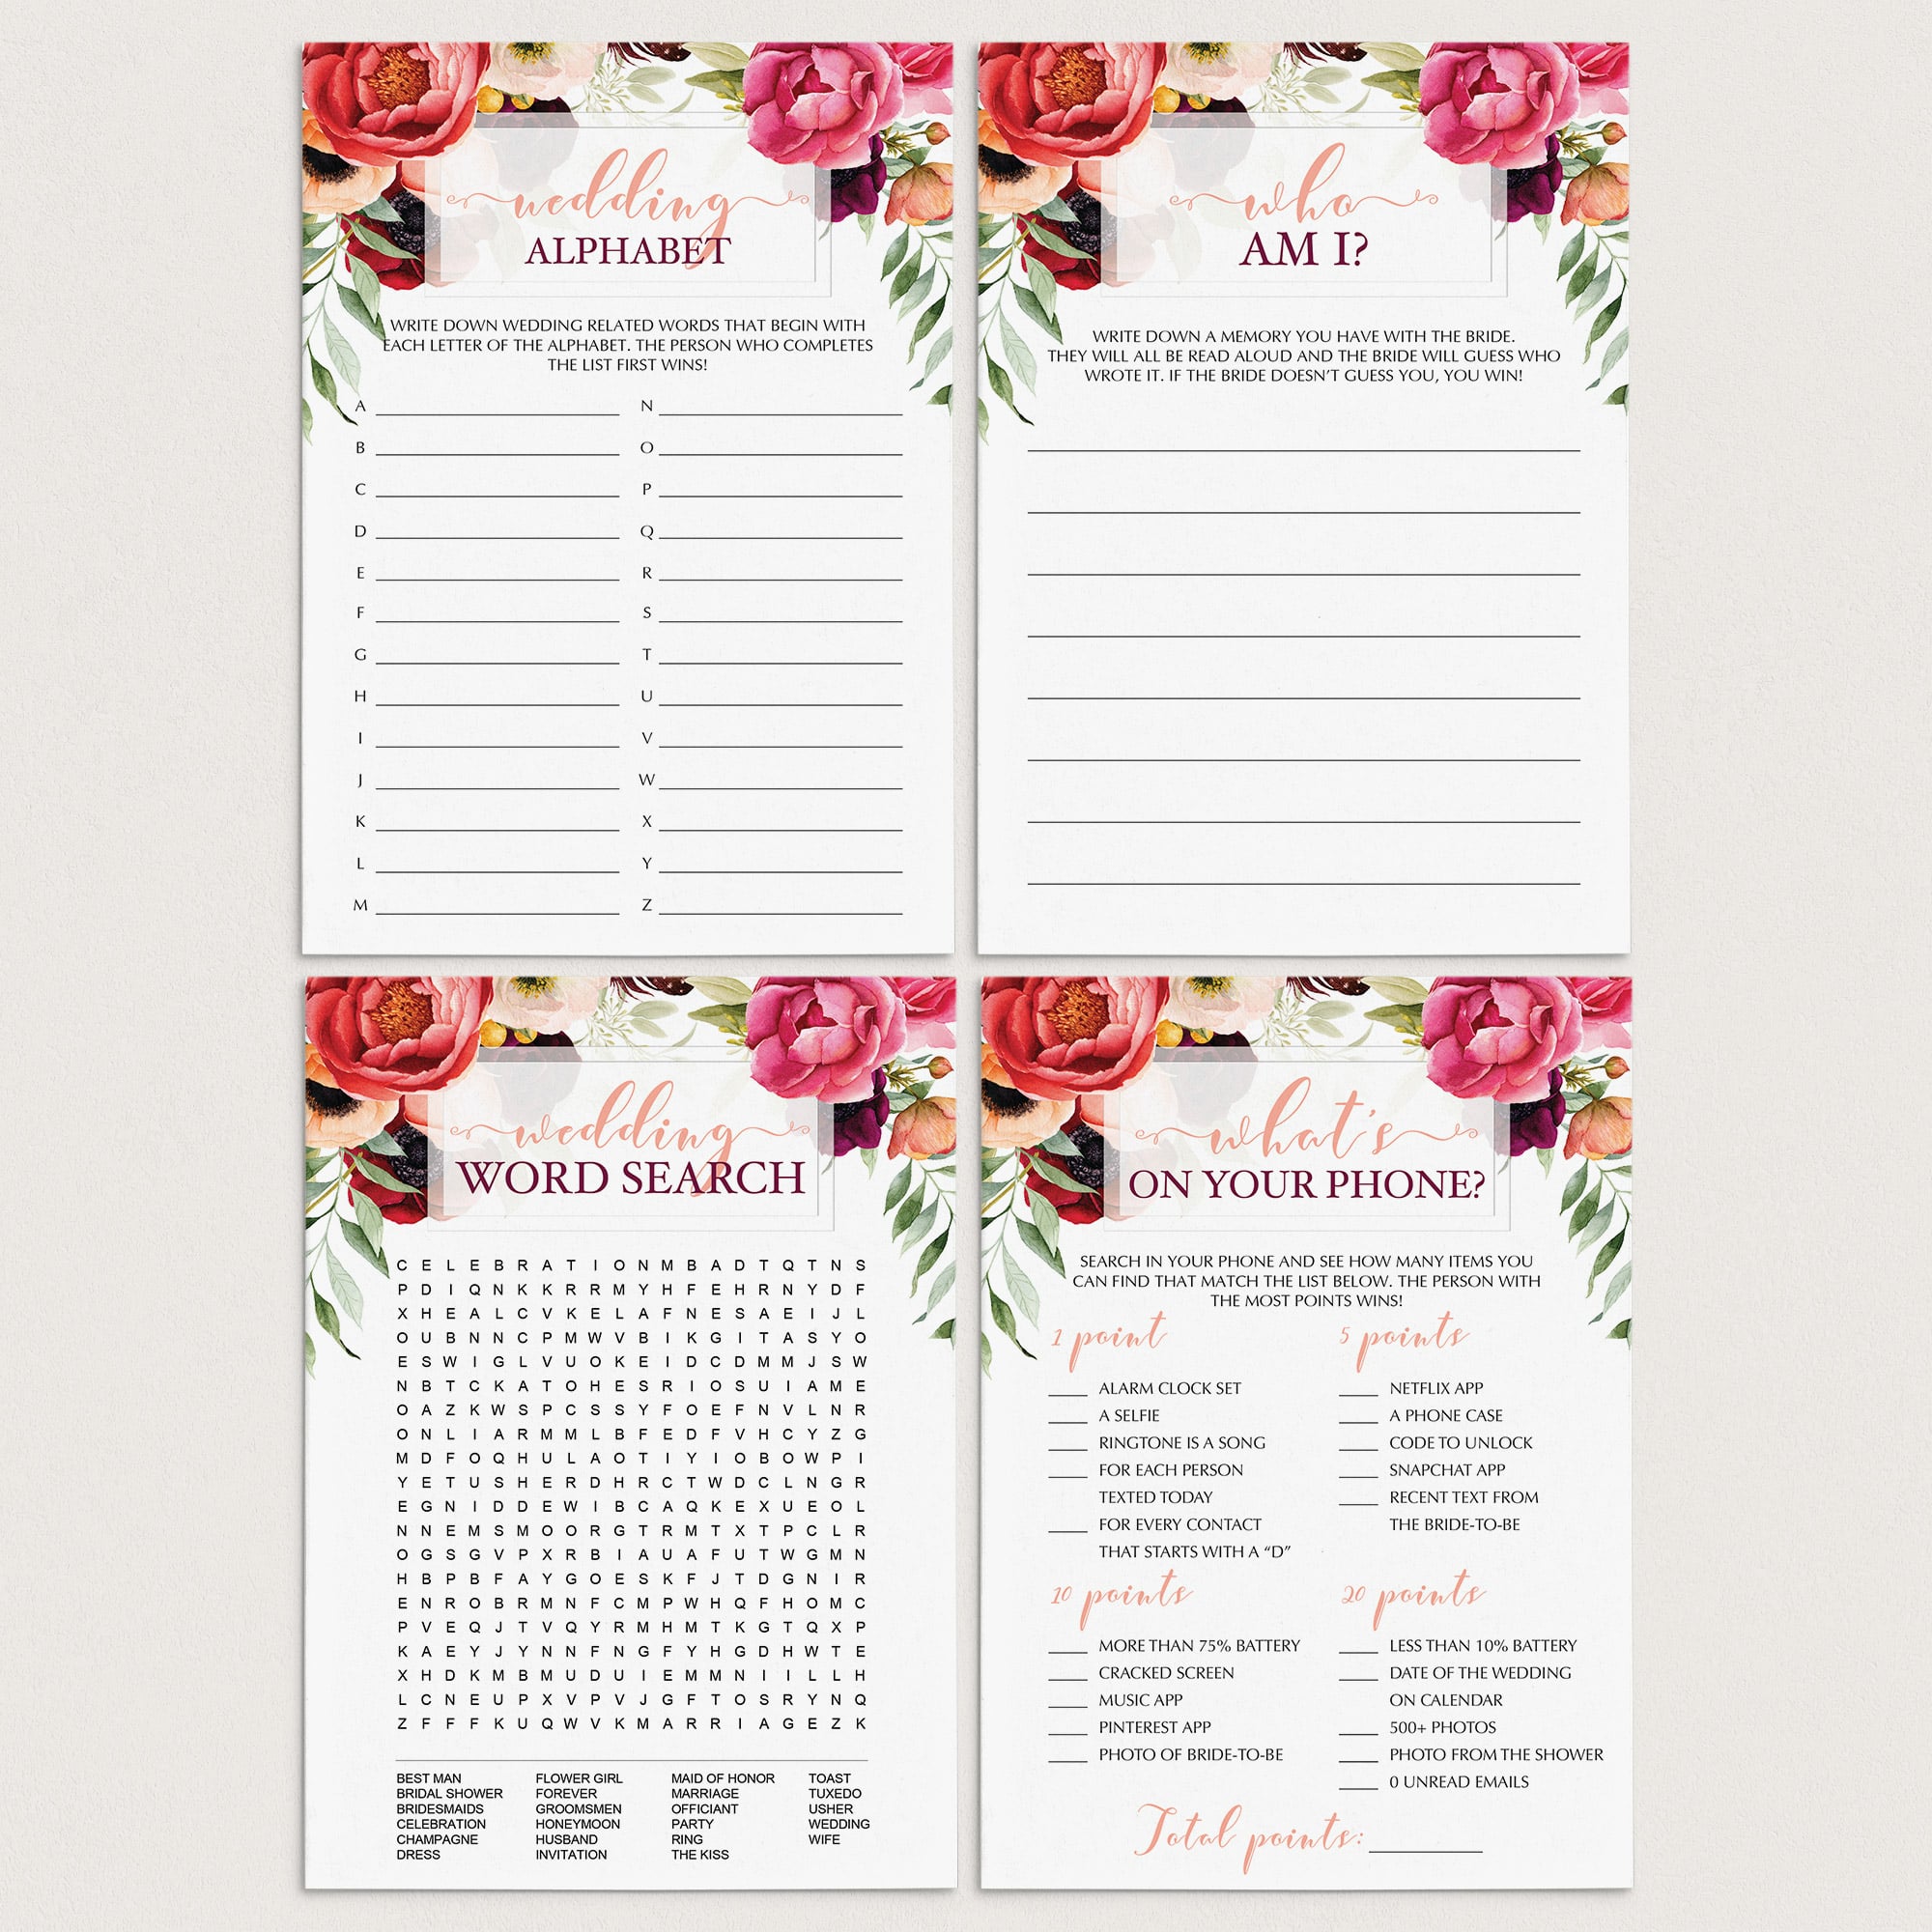 Red Floral Bridal Shower Games Package Download by LittleSizzle